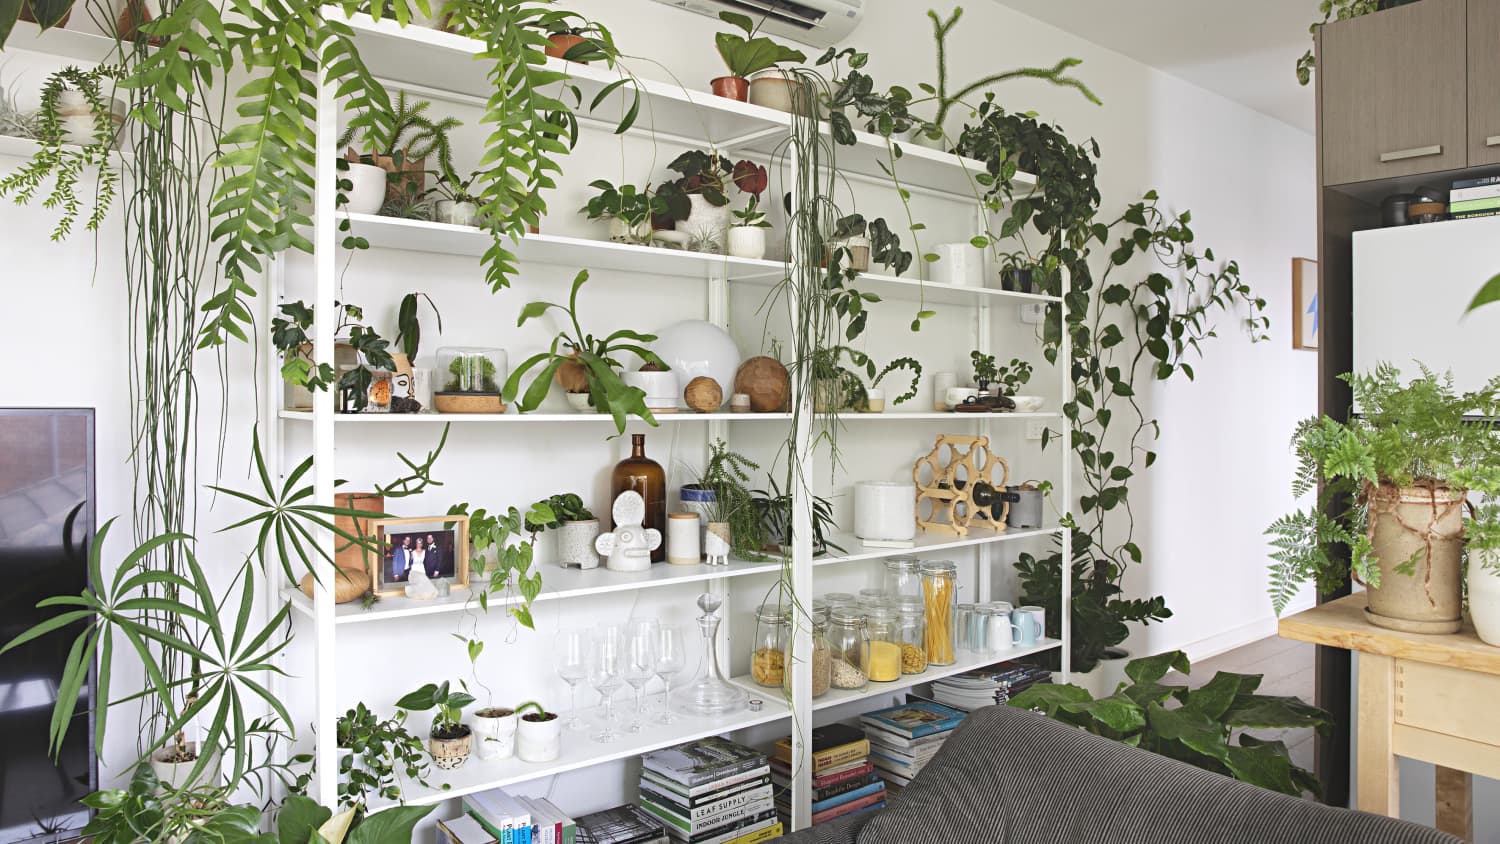 How to Display Houseplants 20 of Our Favorite Plant Display Ideas ...